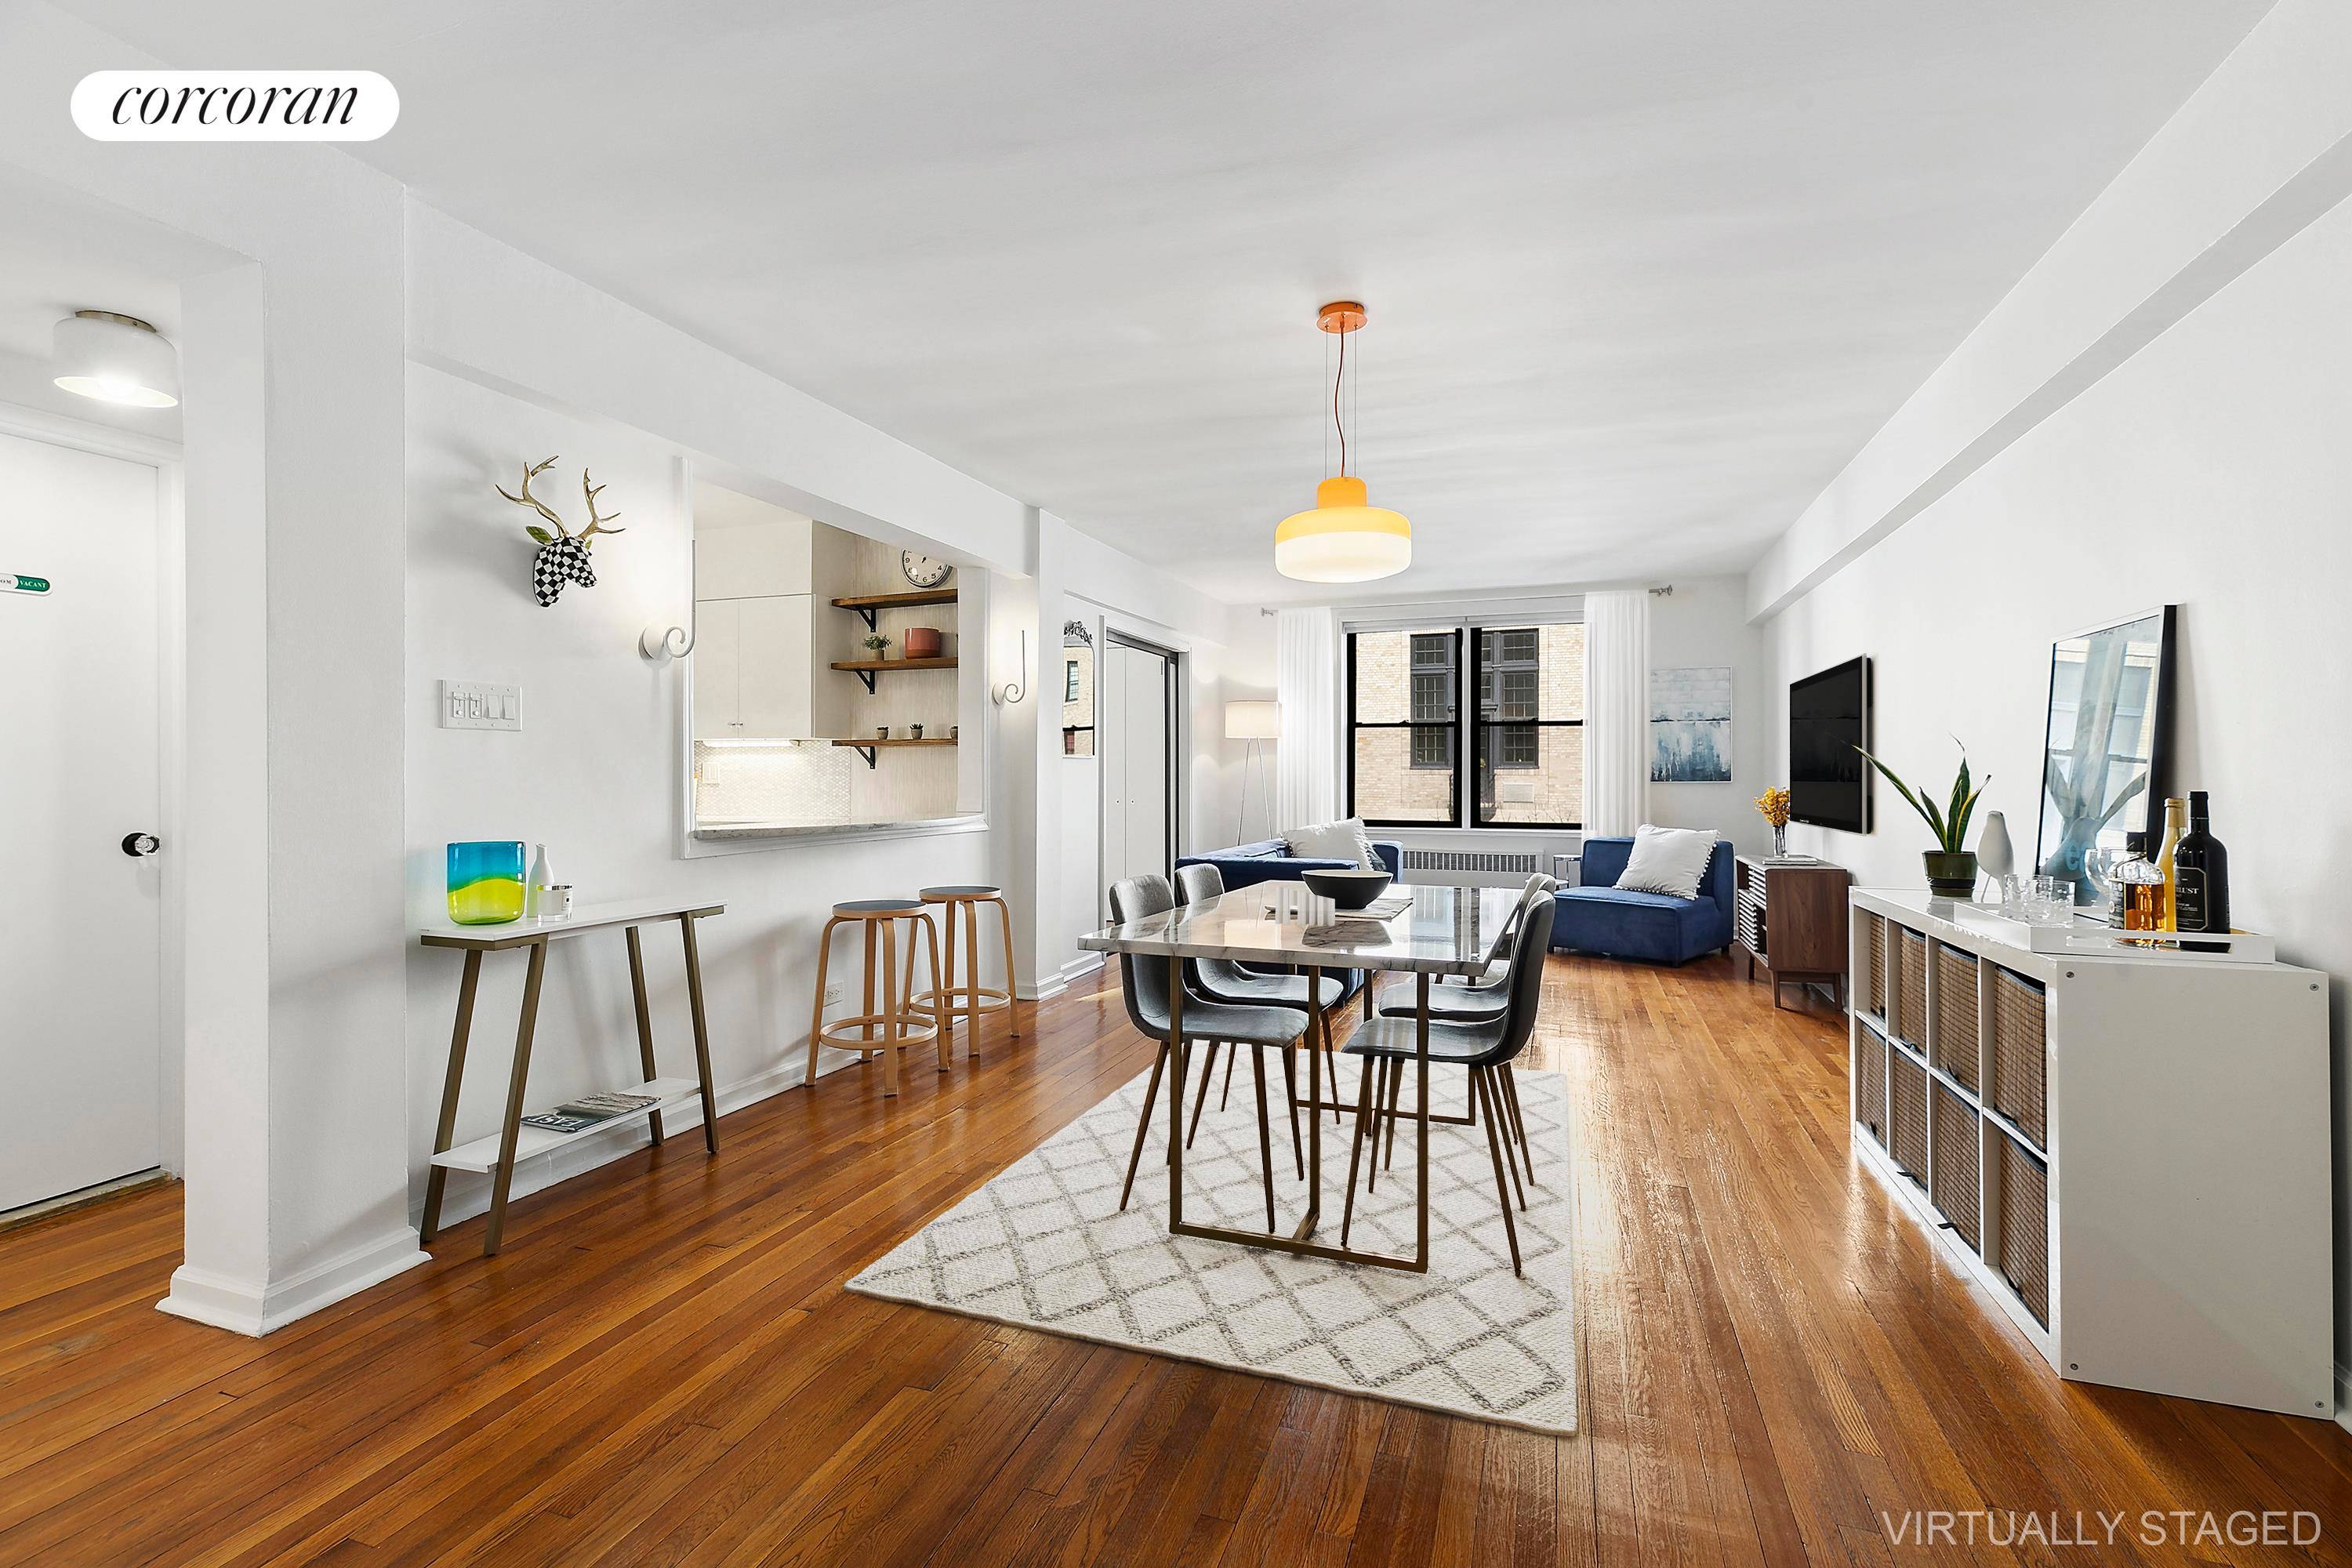 New Price ! 30 East 9th Street, 4B is a stylish 2 Bedroom, 1 bath converted from a XL 1BR Dining Alcove at The Lafayette has been reimagined and is ...